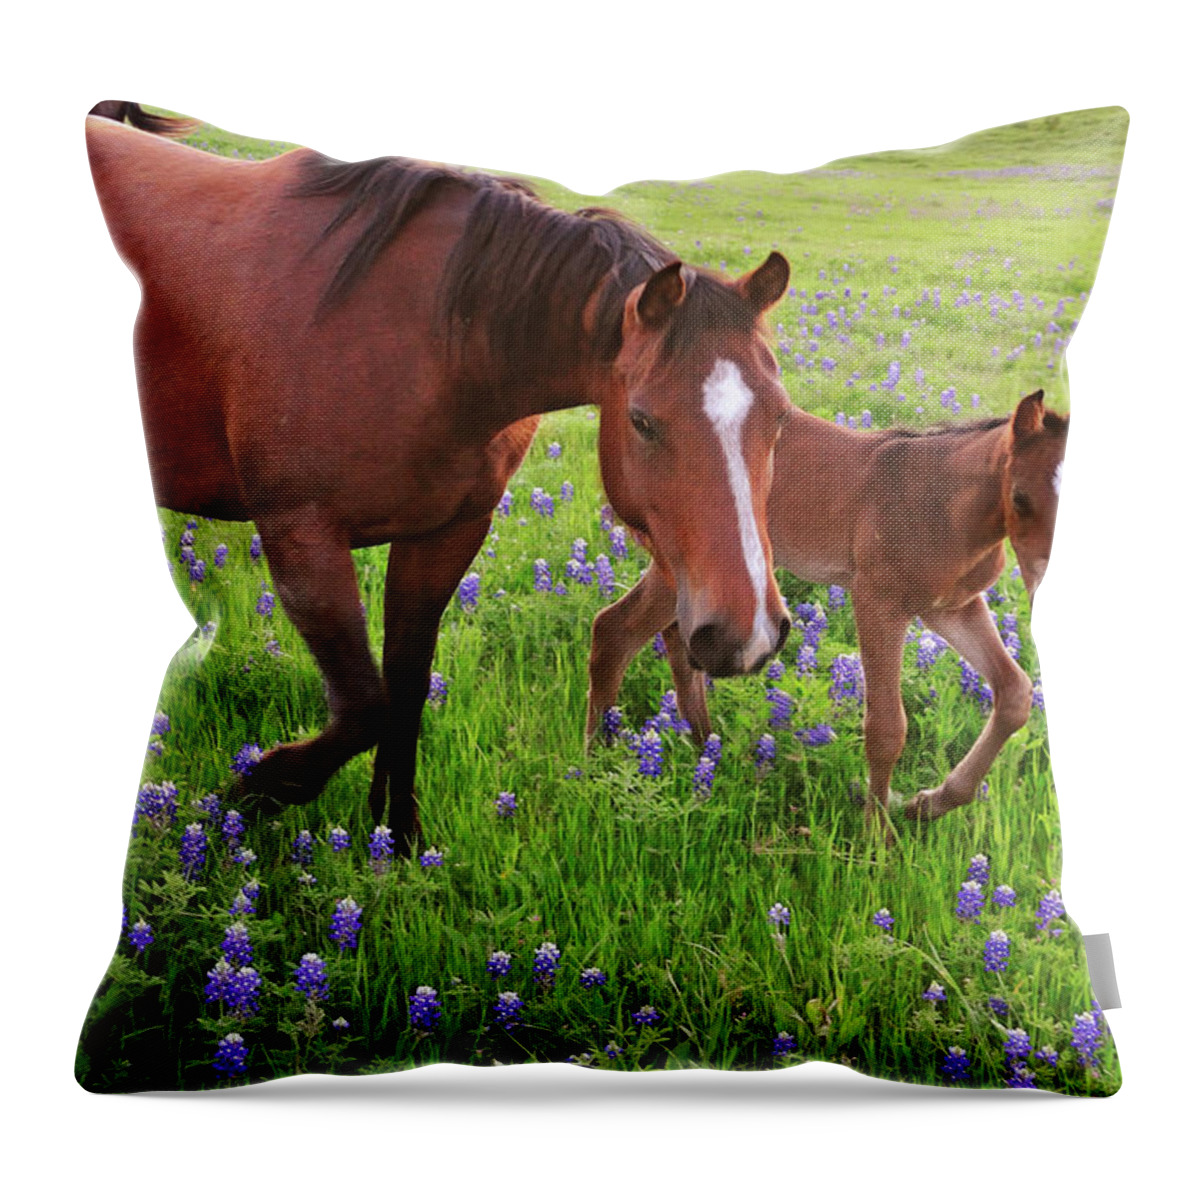 Horse Throw Pillow featuring the photograph Horse On Bluebonnet Trail by David Hensley